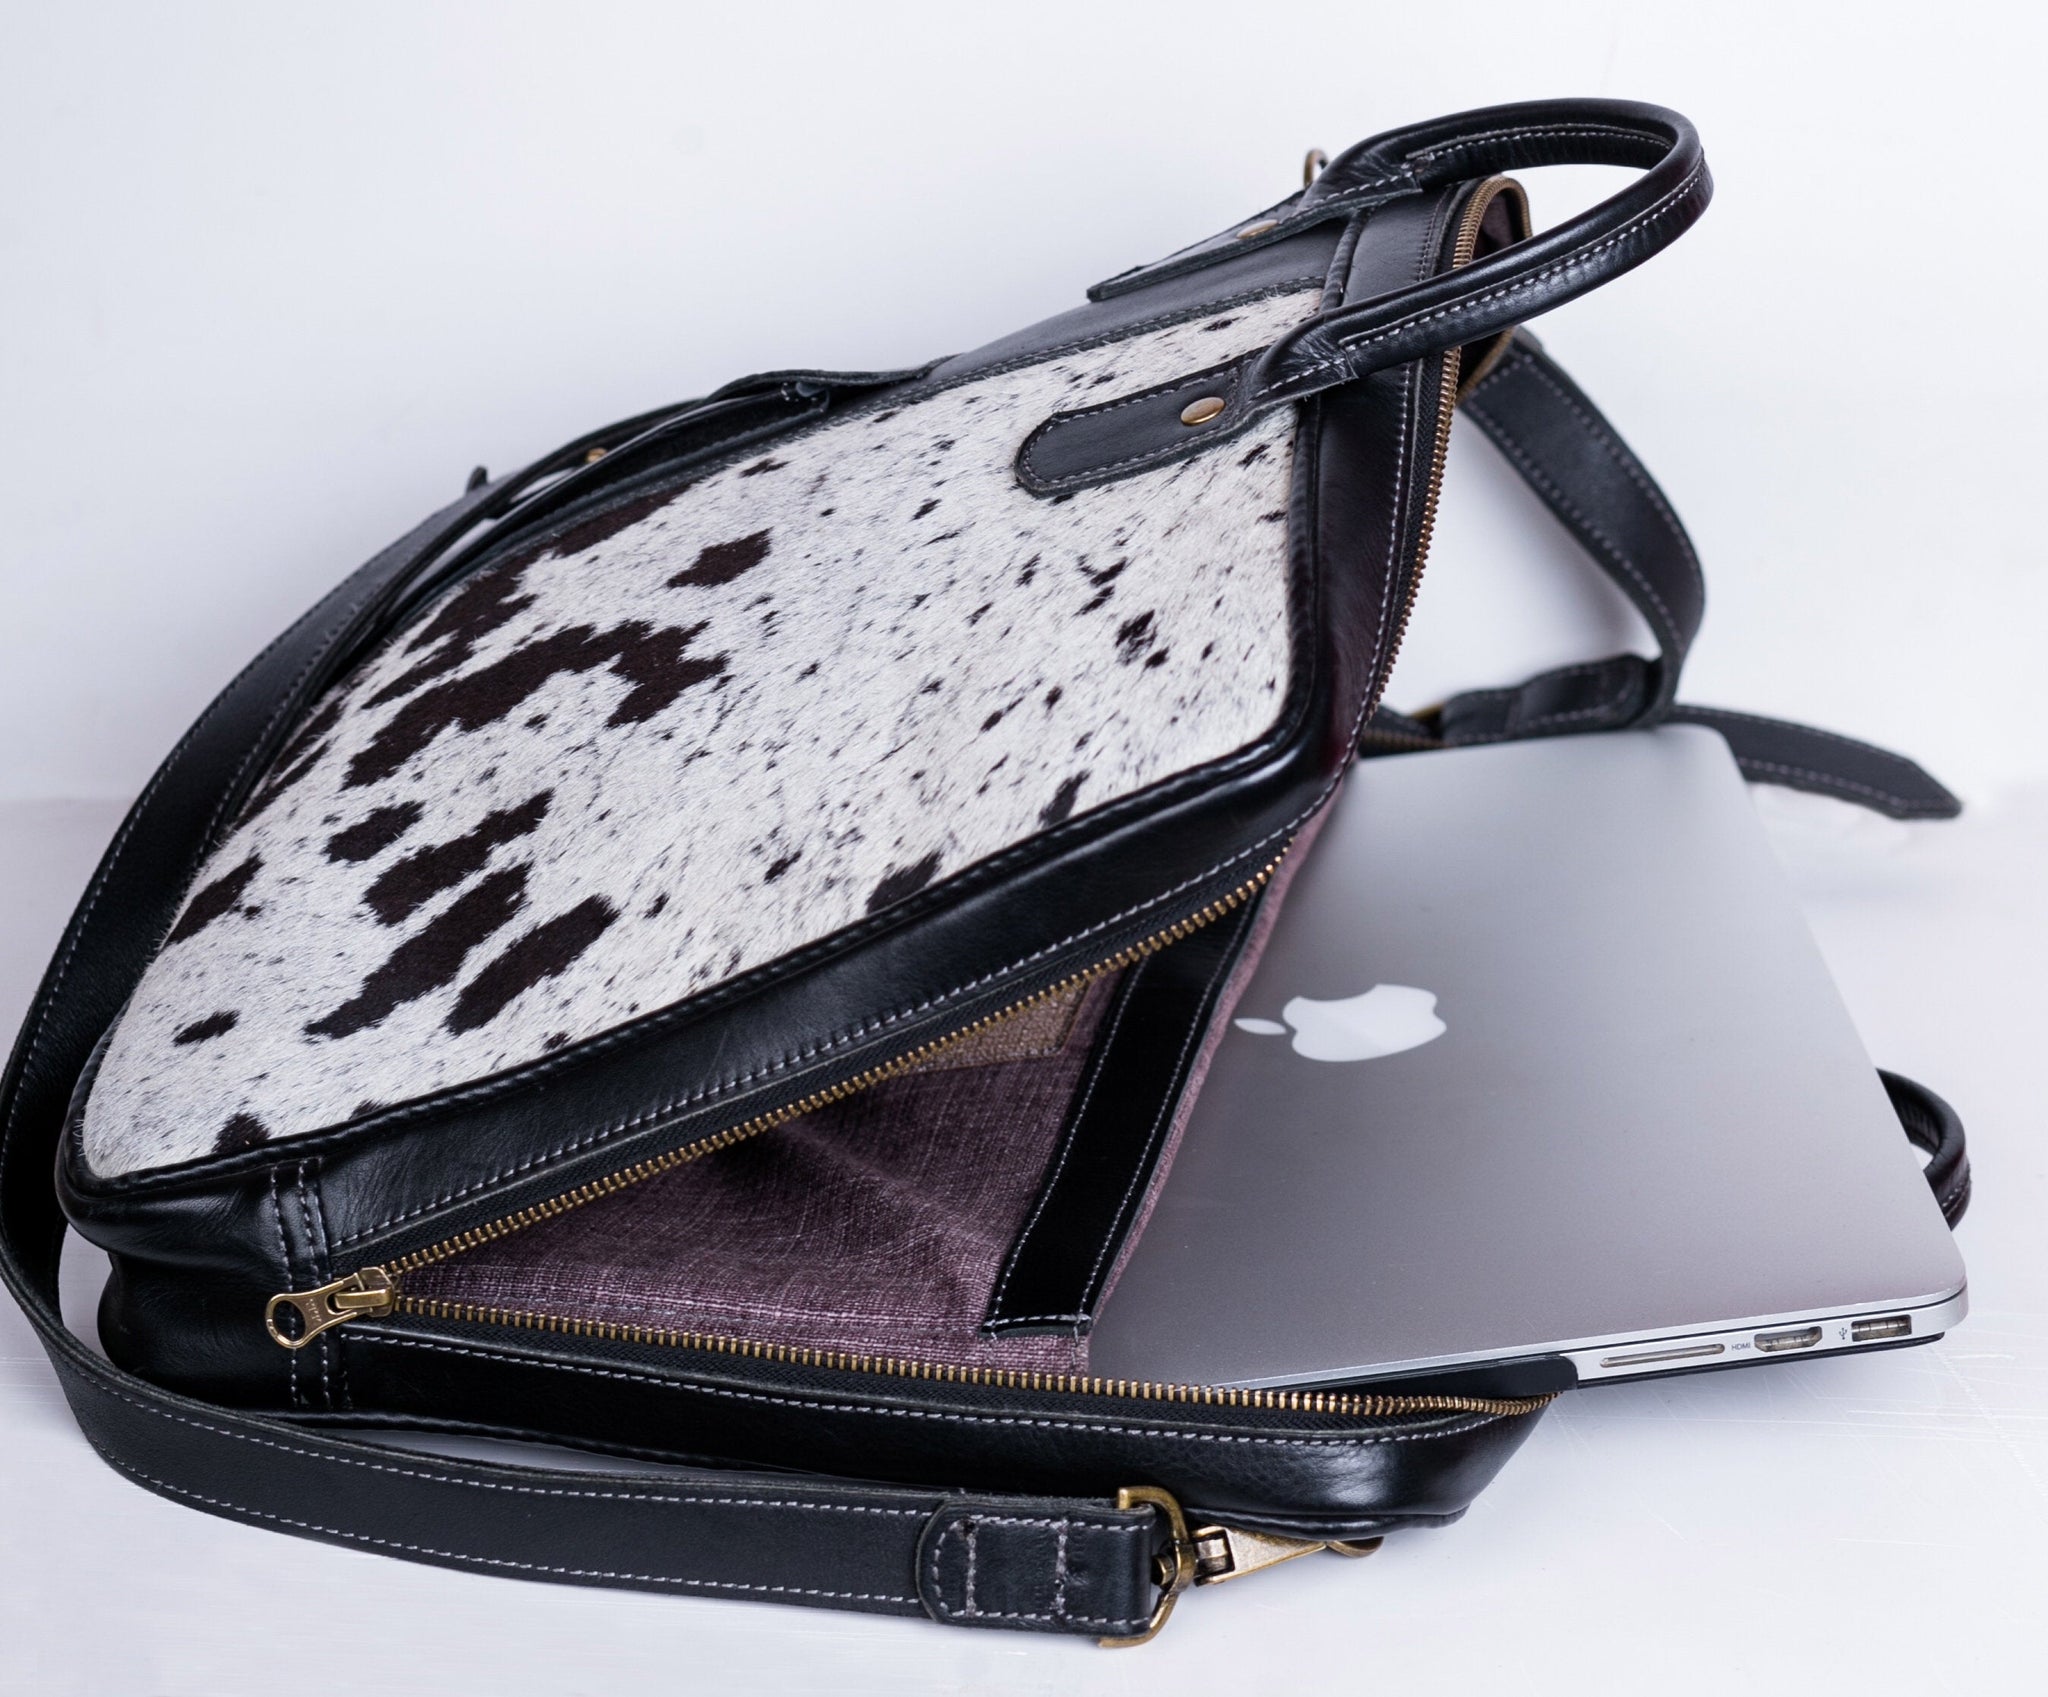 Aspinal Of London Leather Laptop Bag - Farfetch